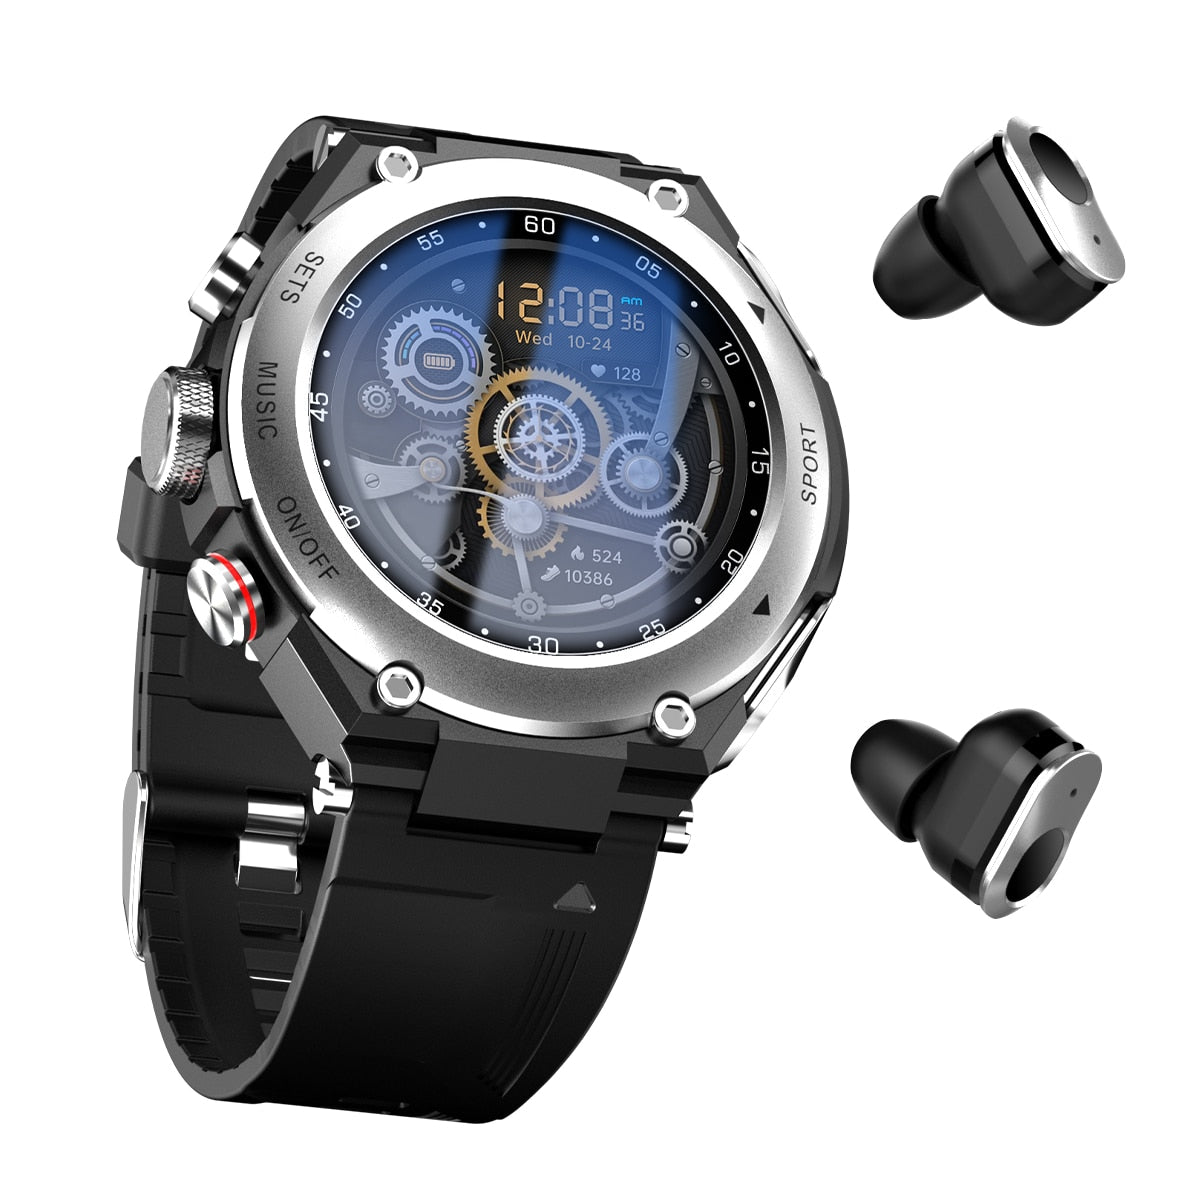 Smart Watch with TWS Earphones, Bluetooth Call, Waterproof, Heart Rate, and Blood Pressure Monitoring